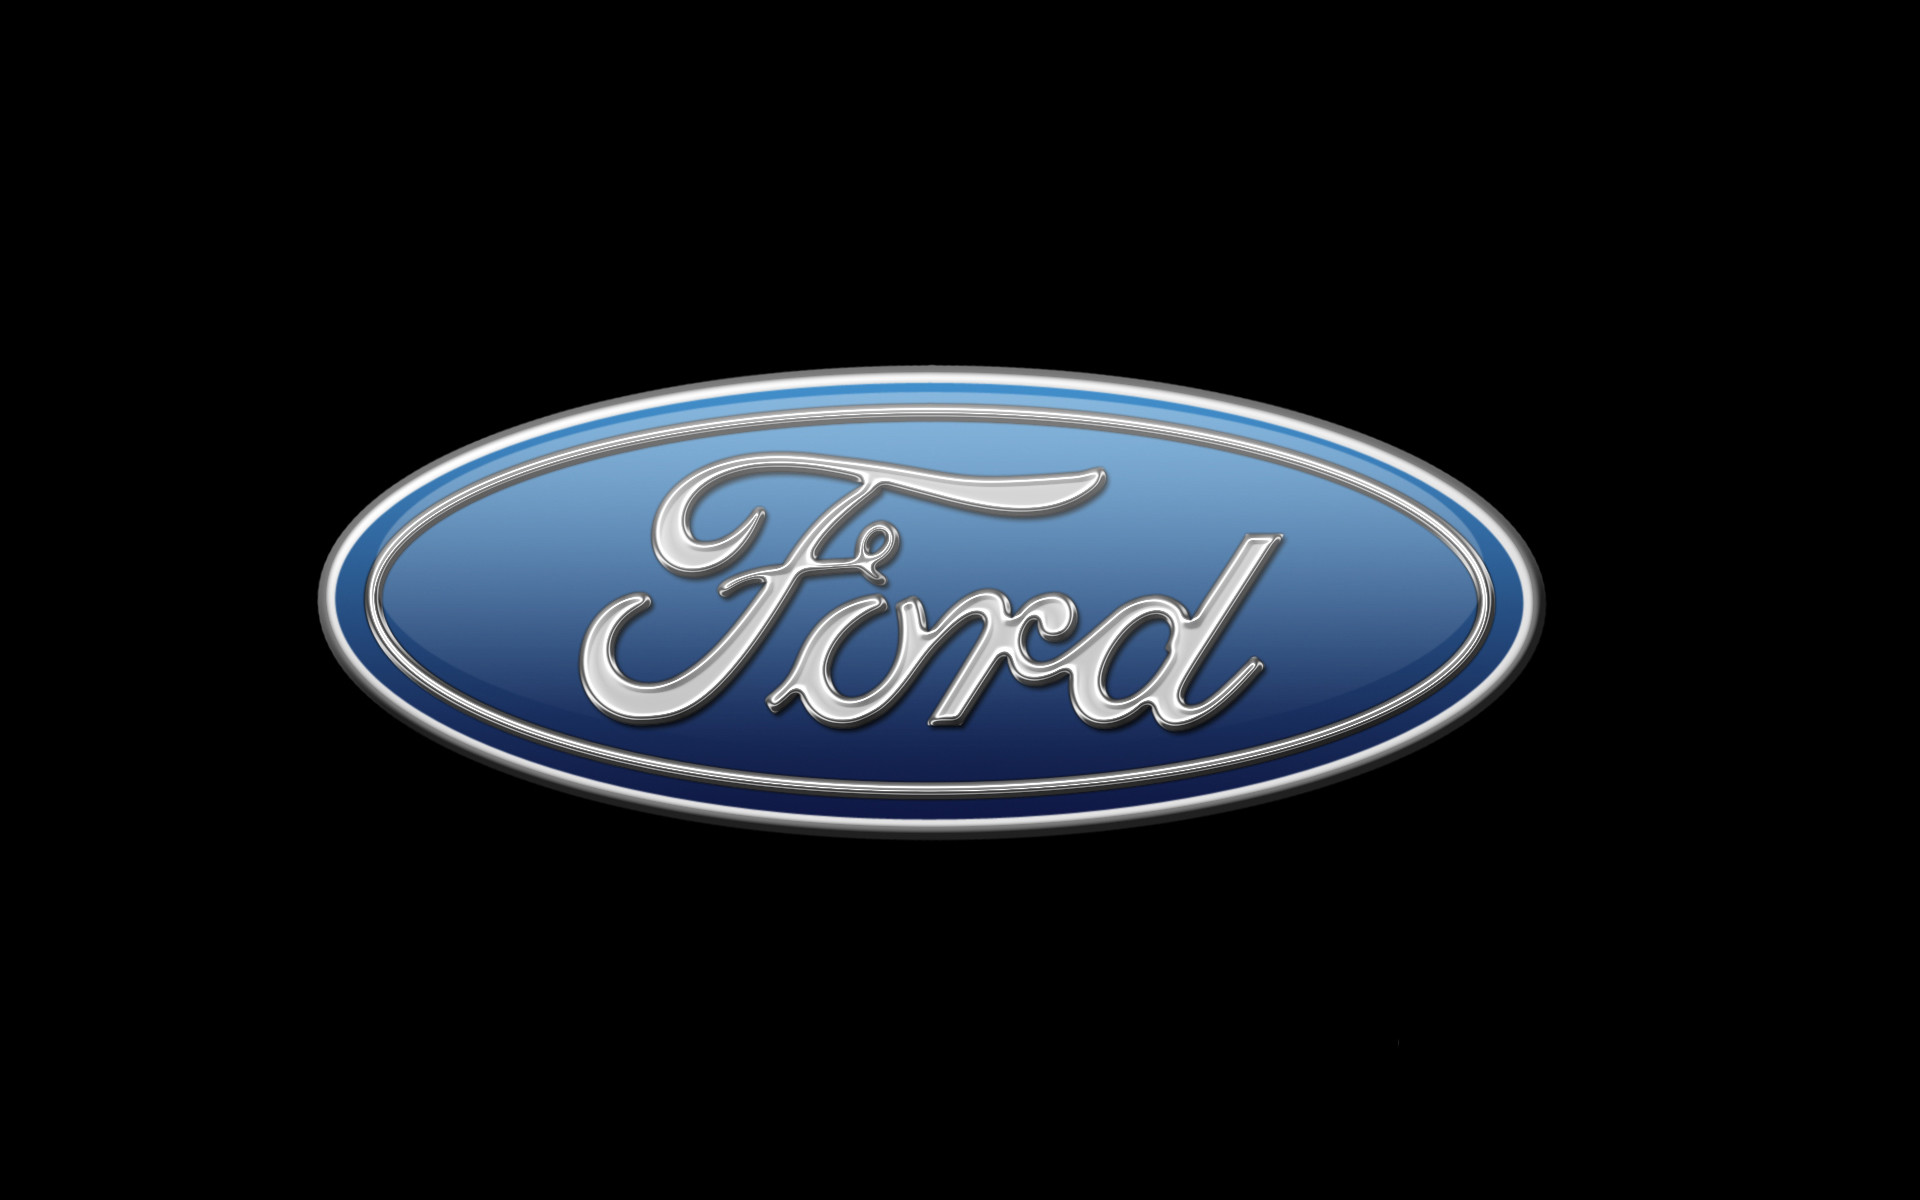 1920x1200 0 Collection of Ford Emblem Wallpaper on HDWallpapers Collection of Ford  Wallpaper on HDWallpapers